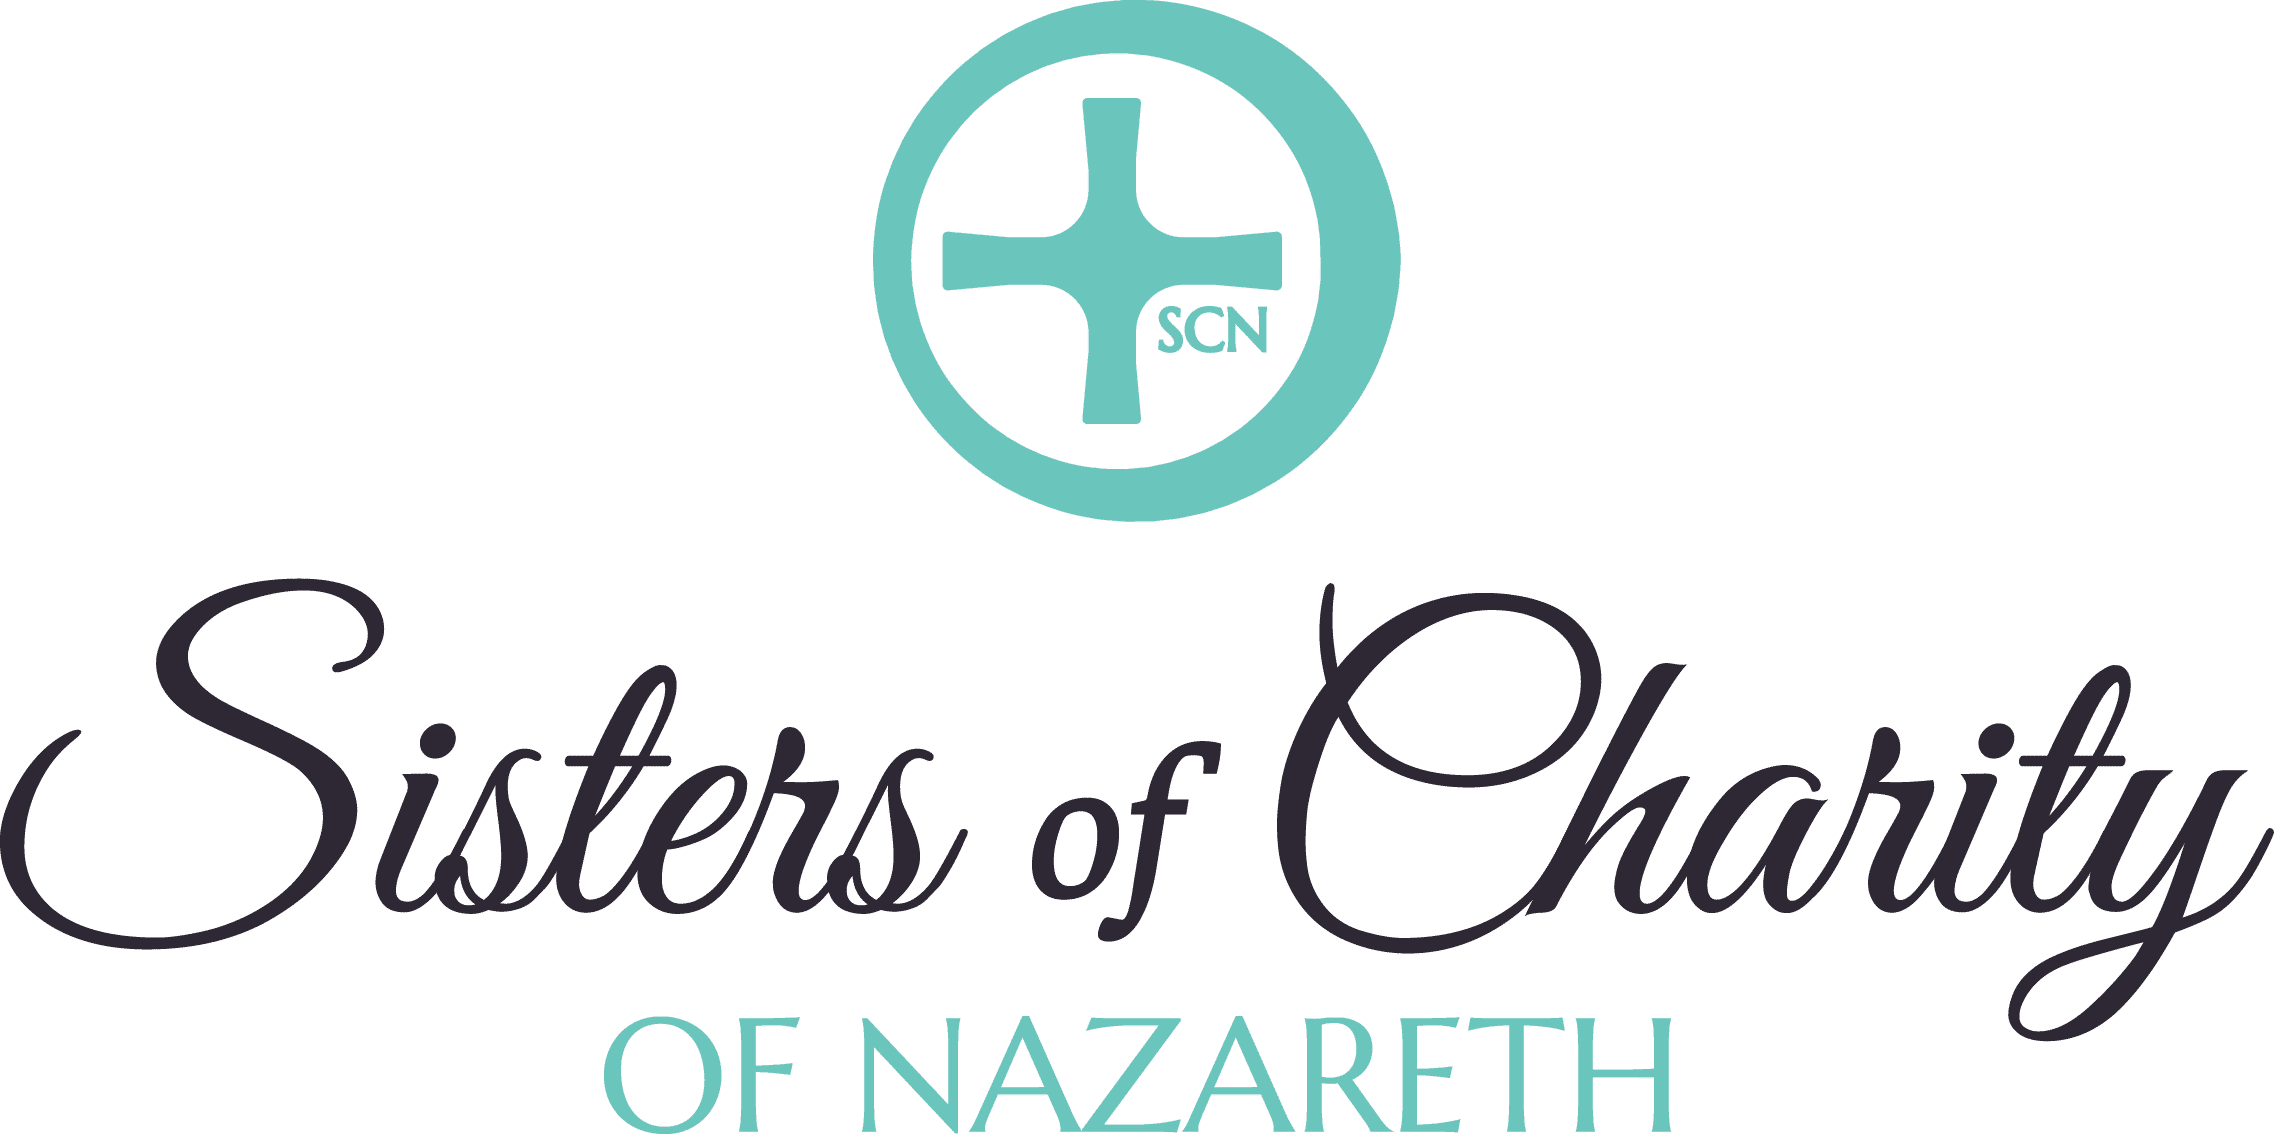 SCN Logo - Brand Components | Sisters of Charity of Nazareth